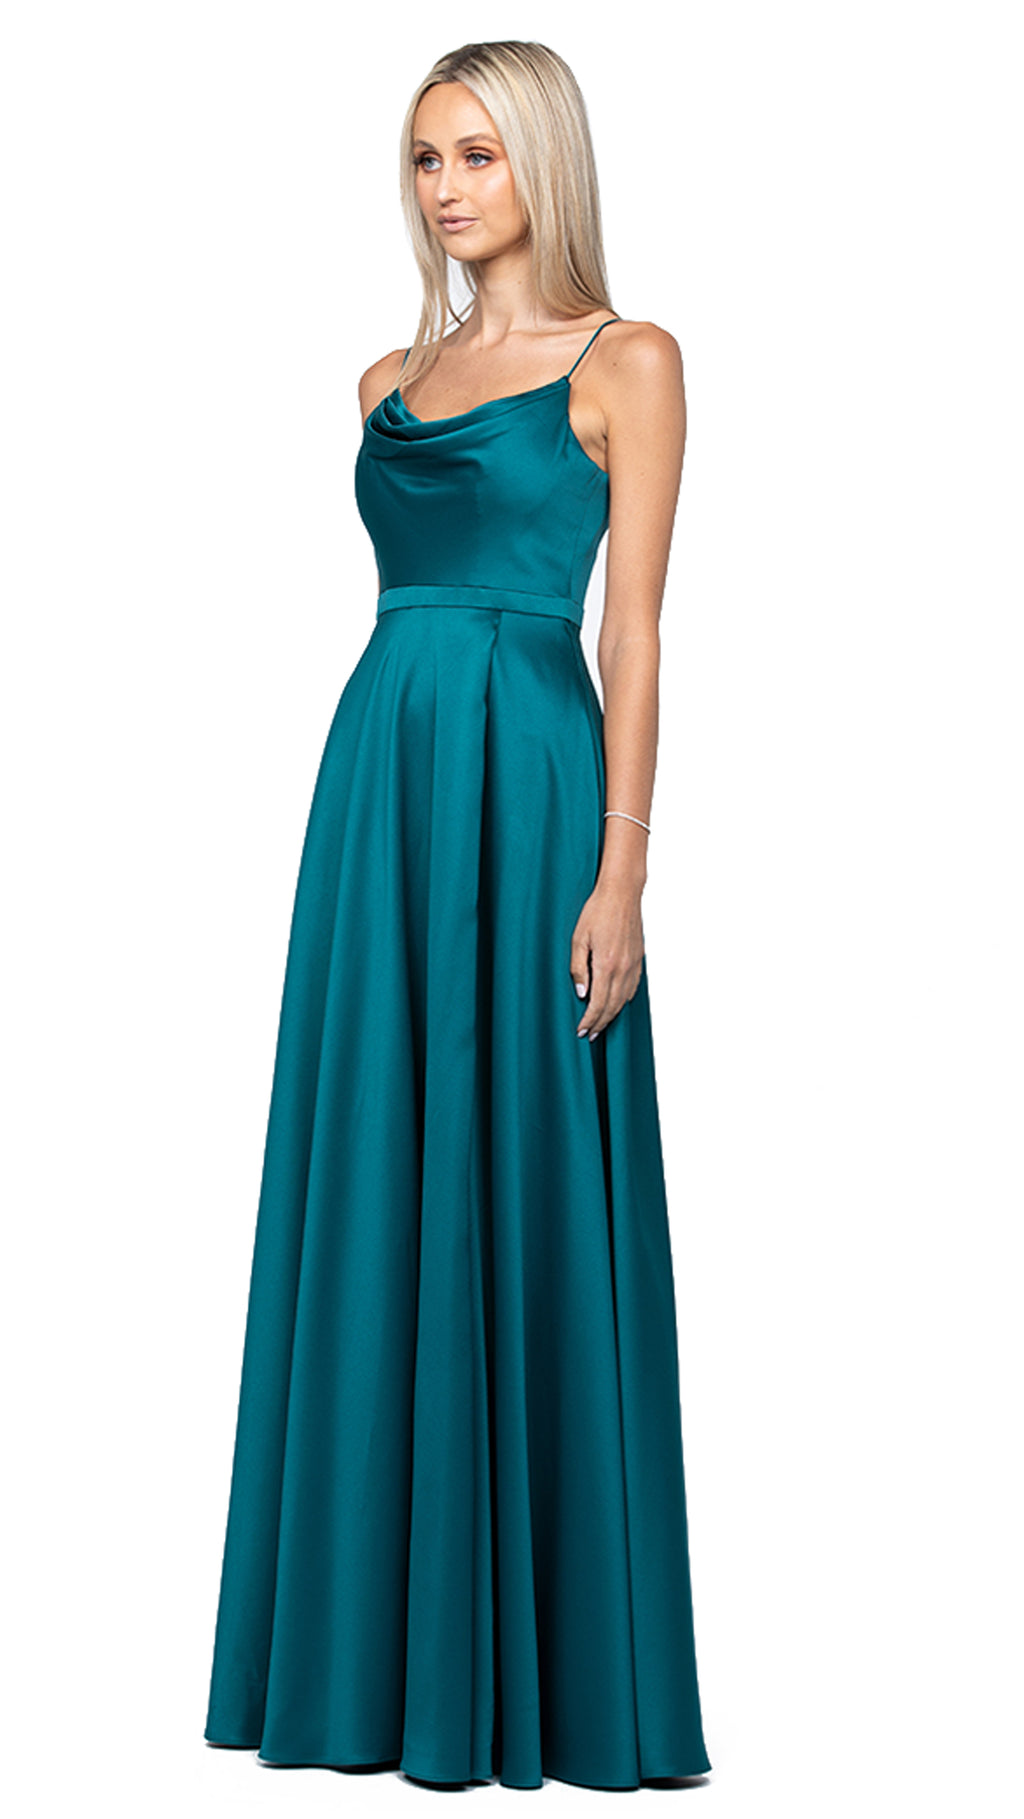 Diamond Cowl Gown in Emerald SIDE